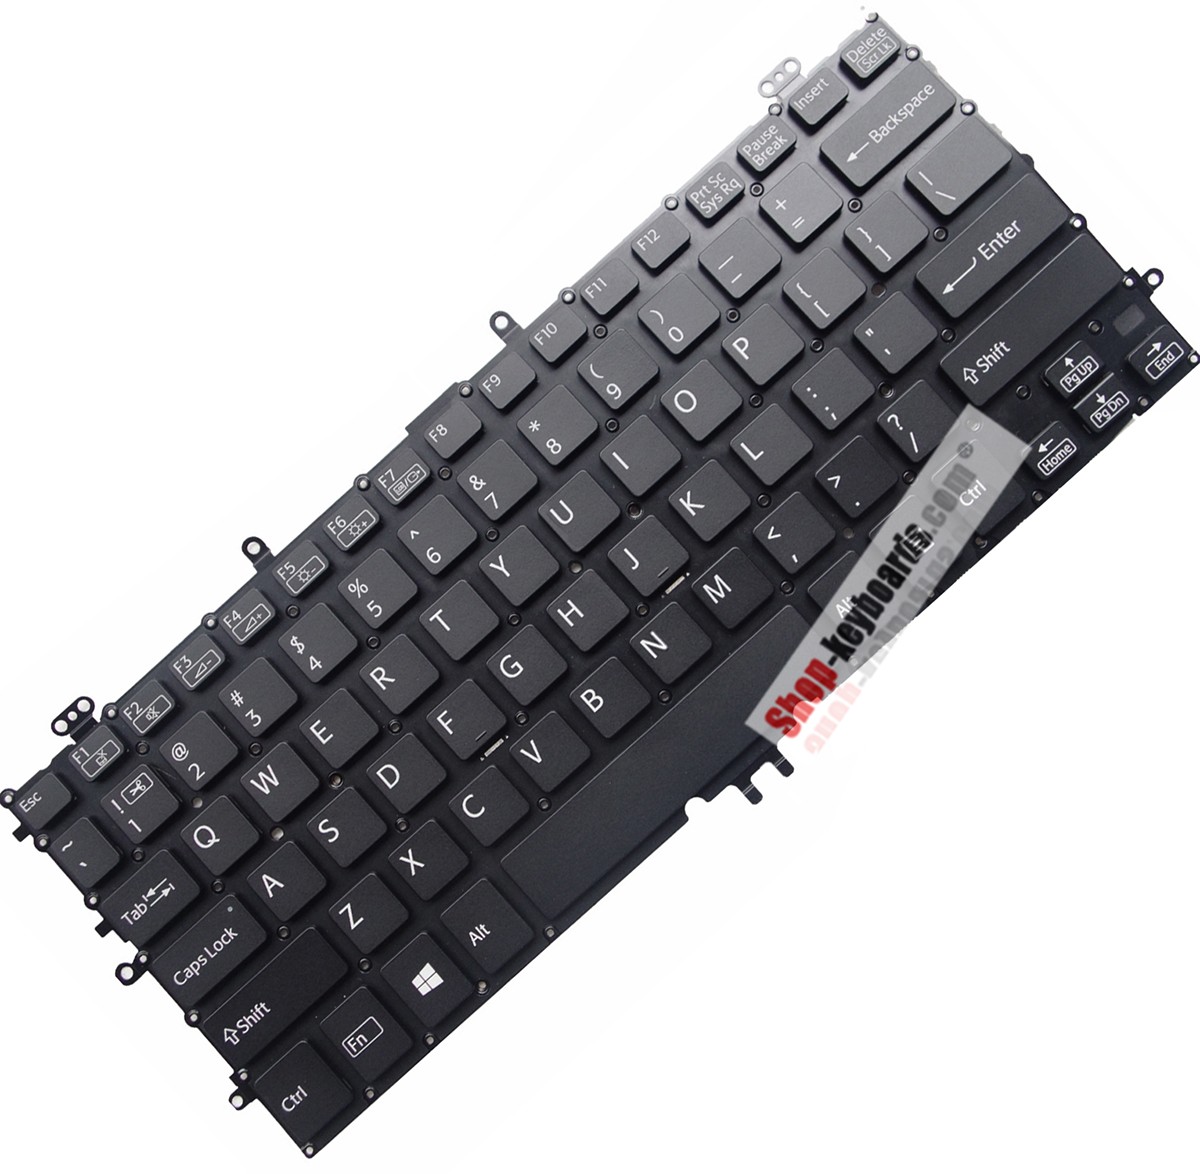 Sony VAIO SVF11N1S2RS  Keyboard replacement